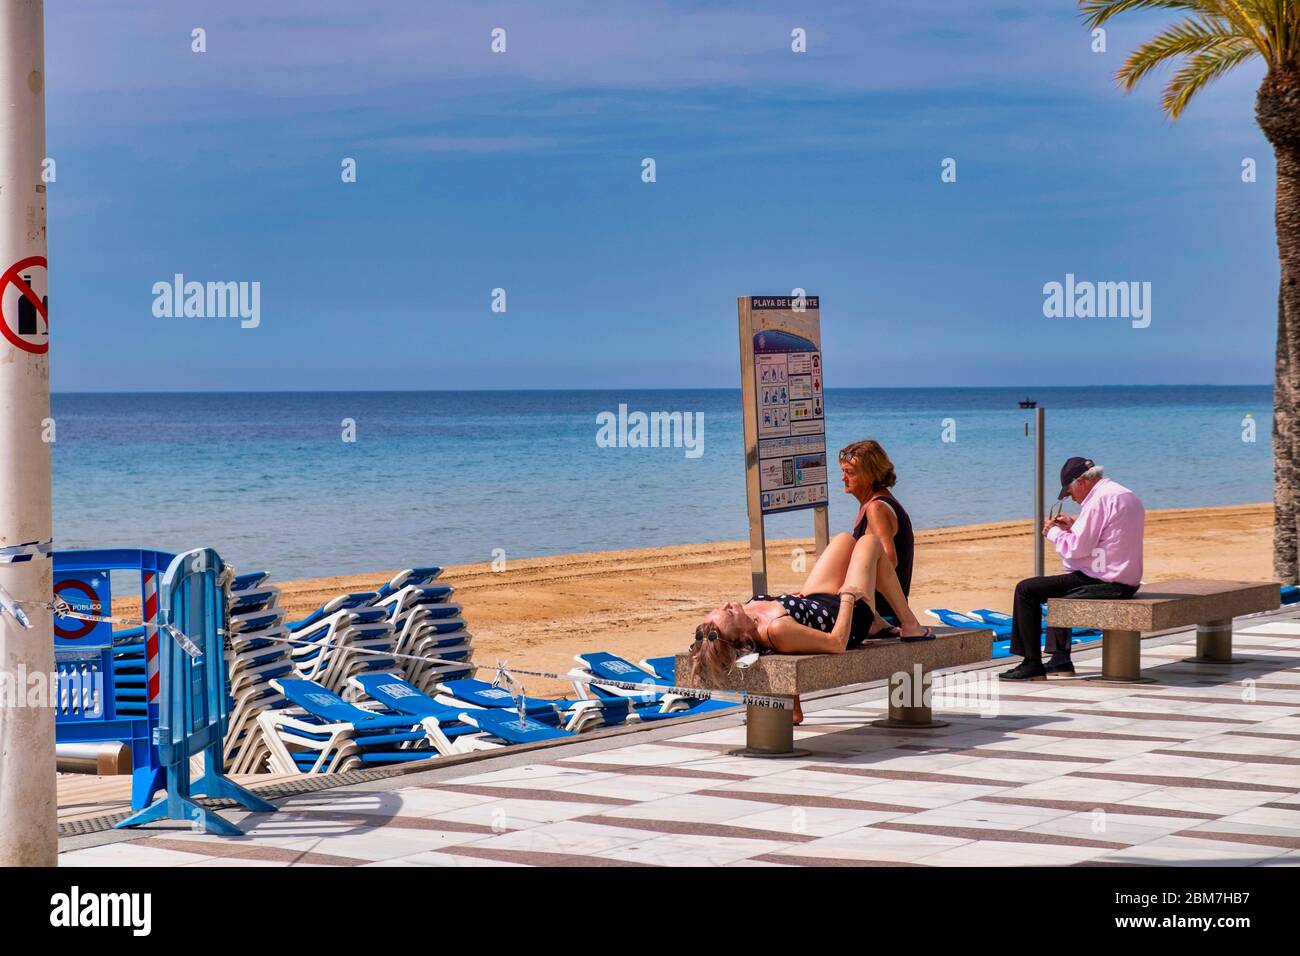 Benidorm, Alicante Spain, 4.5.2020, corona crisis: three people sit and lie on stone benches on the promenade on the deserted Playa Levante beach Stock Photo